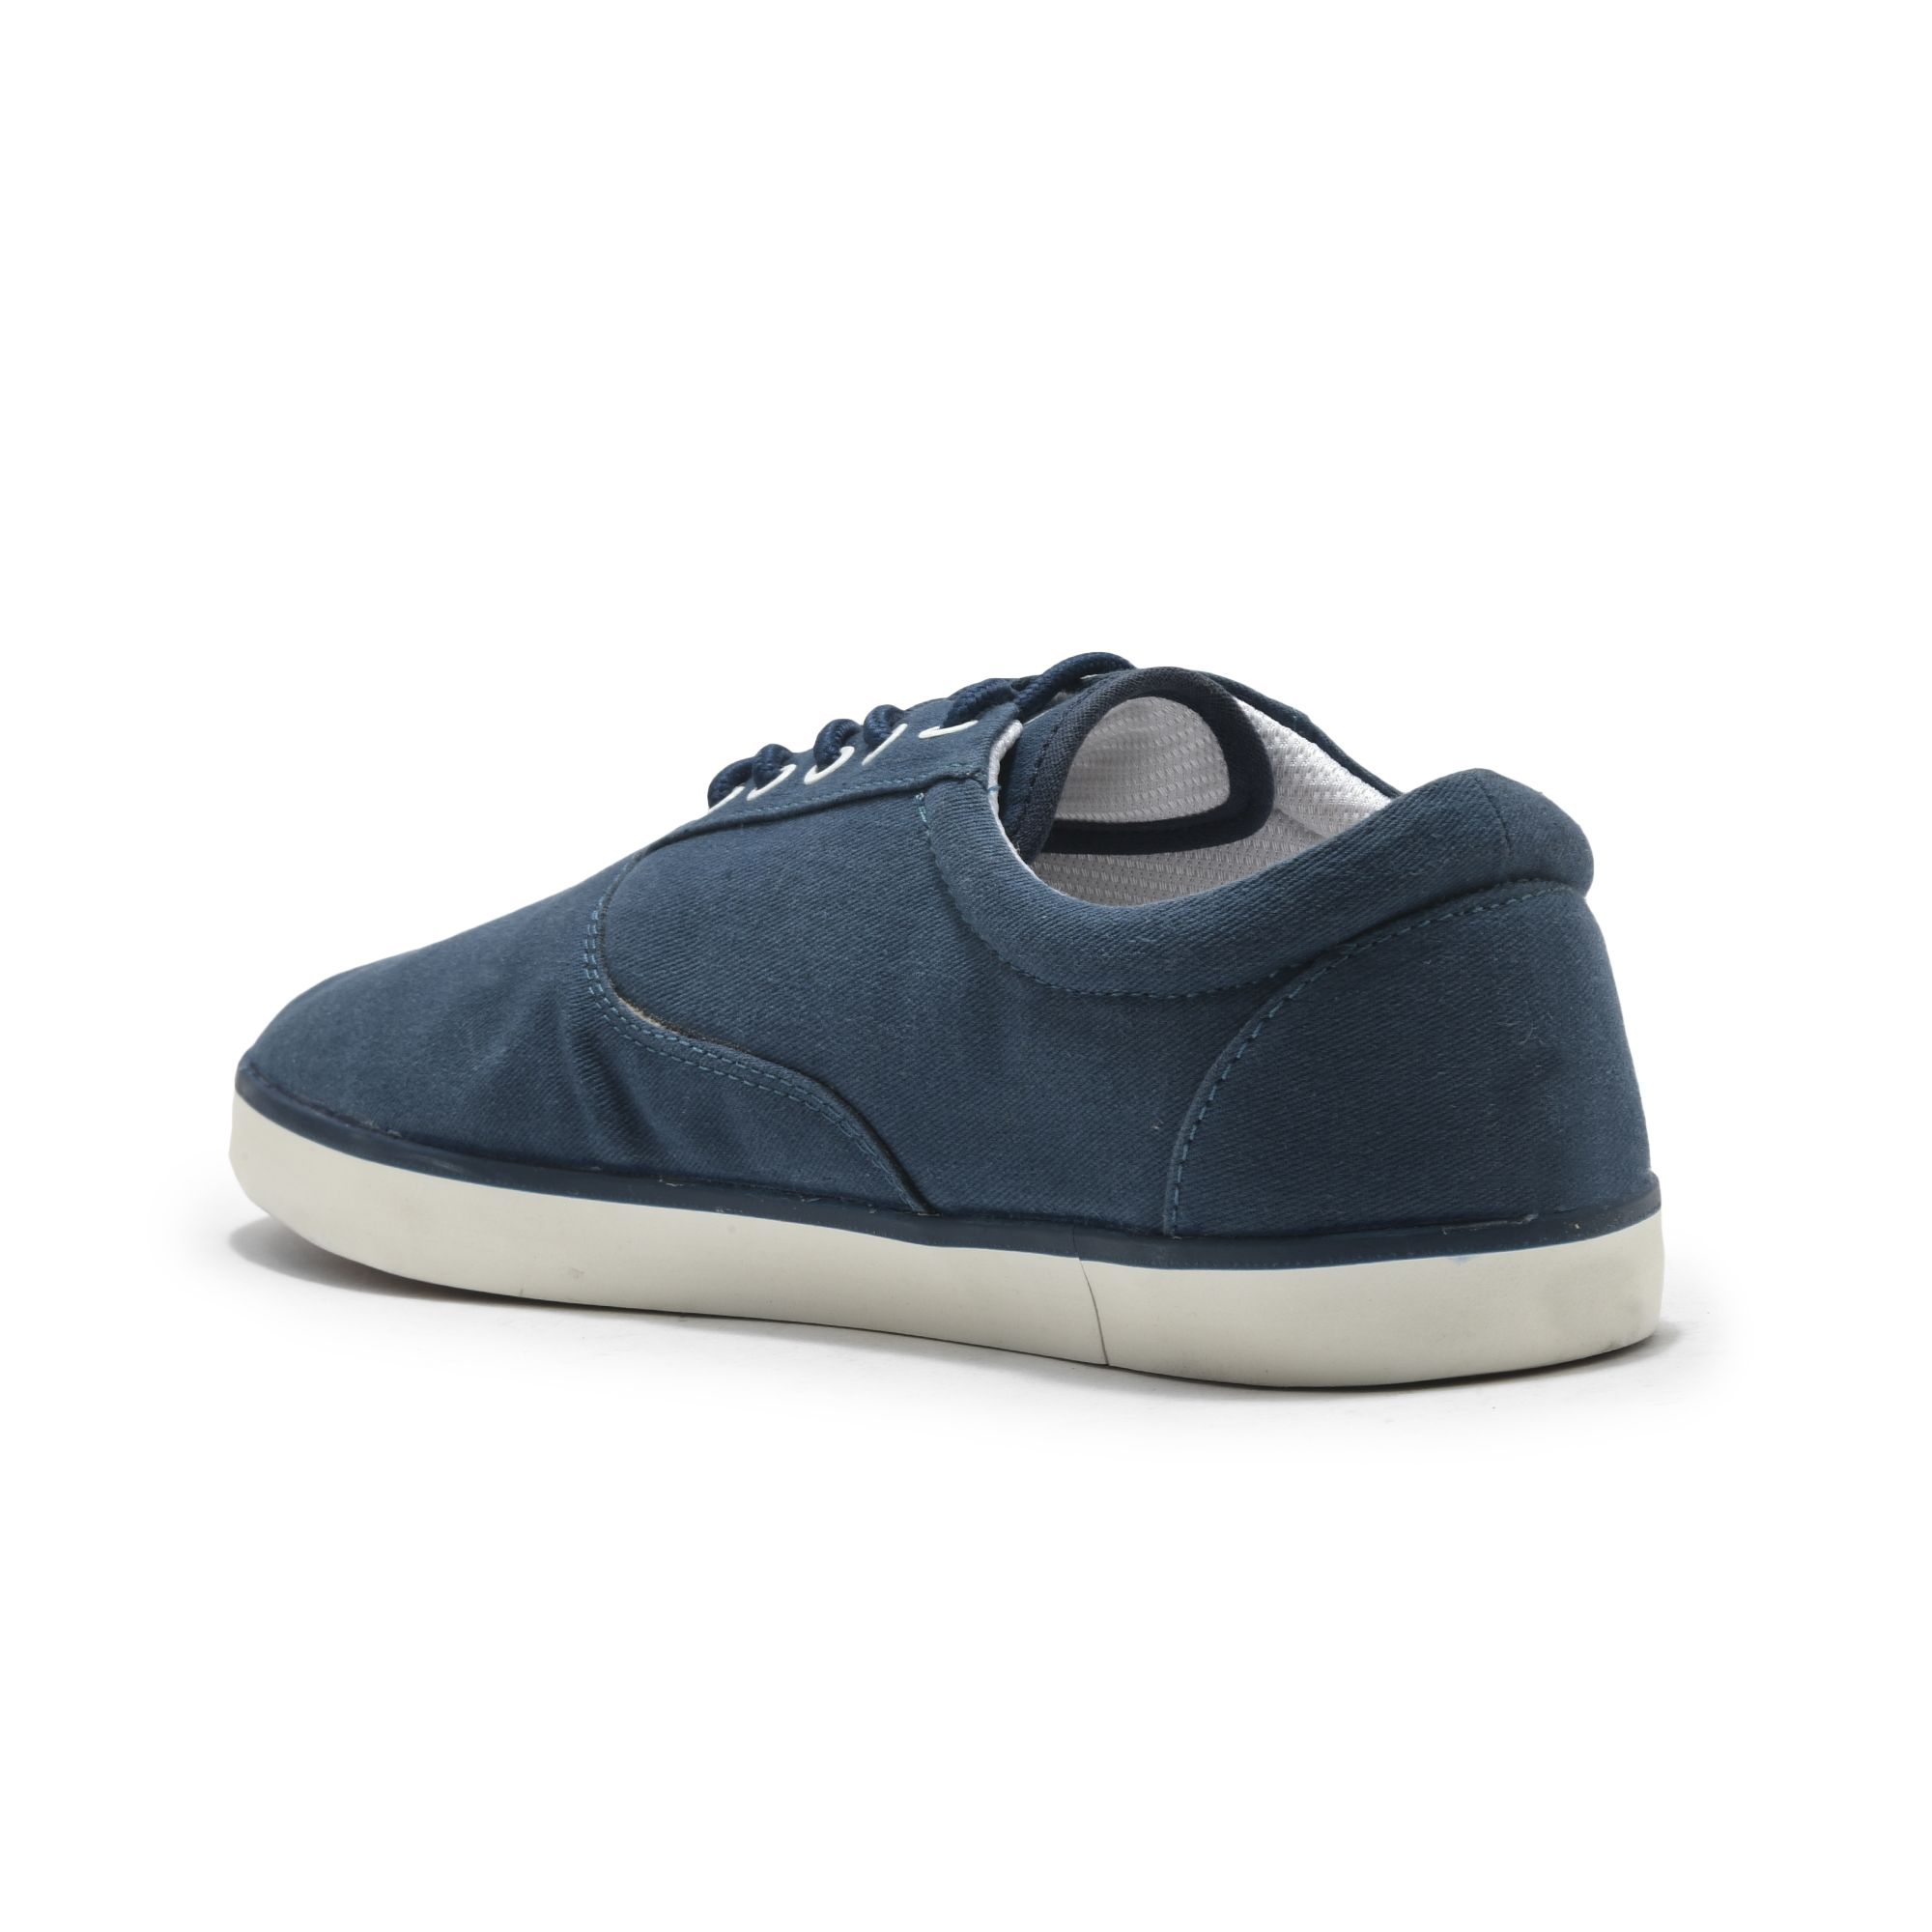 Blue casual Sneakers for men